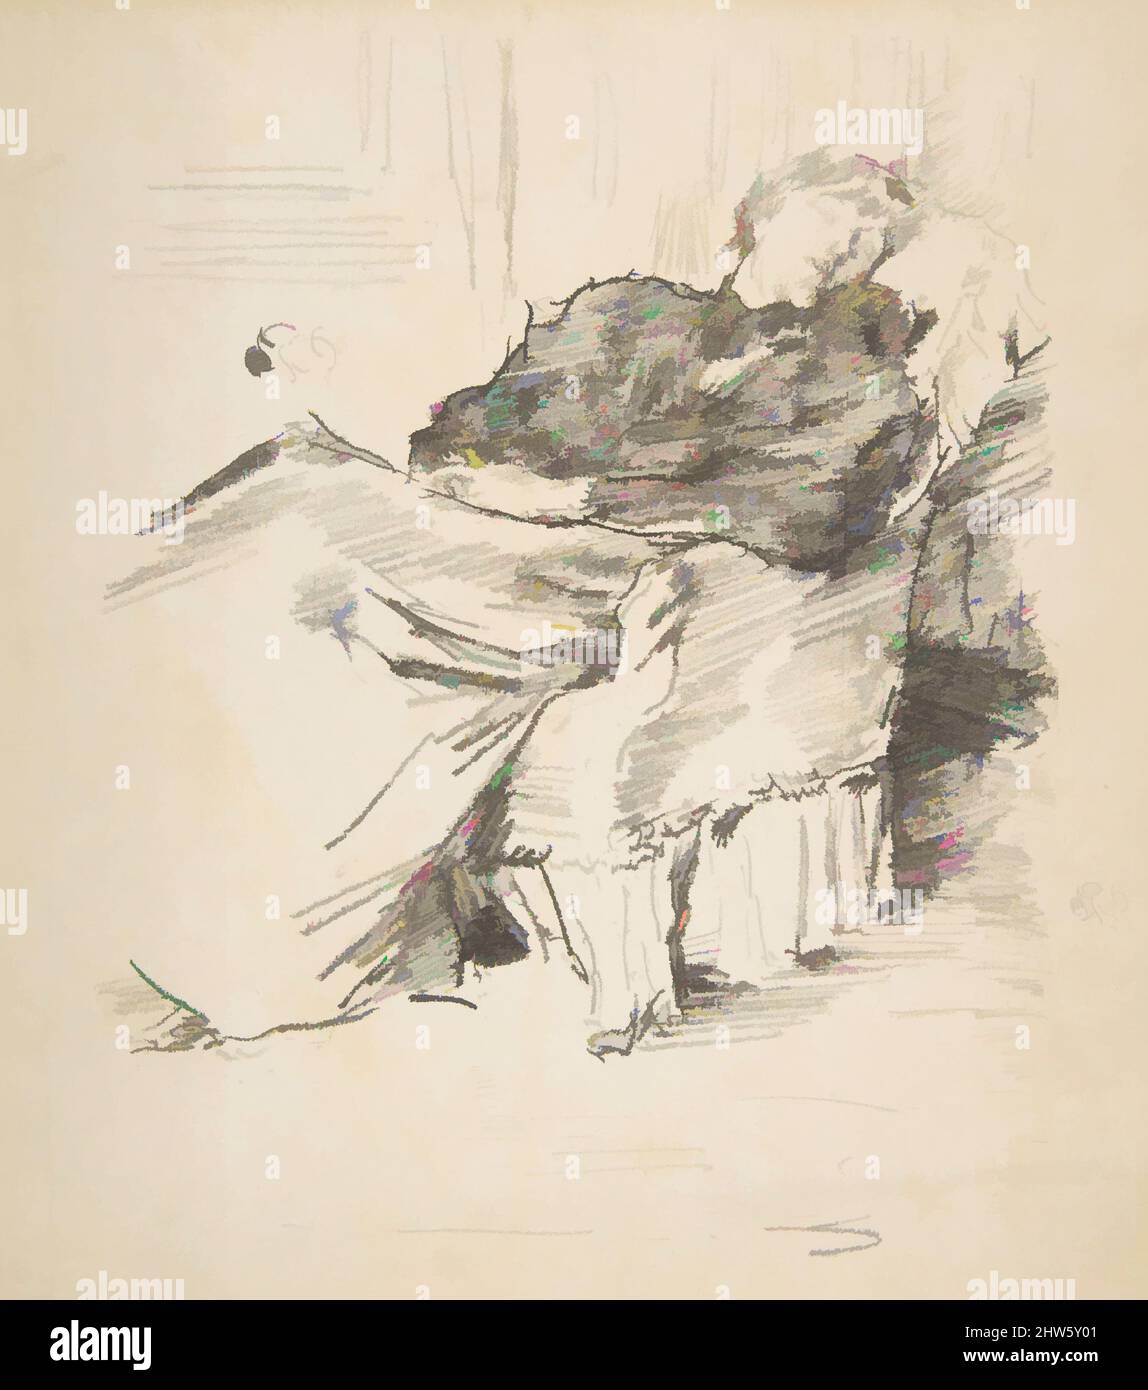 Art inspired by La Belle Dame Endormie (The Beautiful Woman Asleep), 1894, Transfer lithograph, drawn on thin, transparent transfer paper; only state (Chicago); printed in black ink on medium weight ivory laid paper, Image: 7 15/16 × 6 1/8 in. (20.2 × 15.6 cm), Prints, James McNeill, Classic works modernized by Artotop with a splash of modernity. Shapes, color and value, eye-catching visual impact on art. Emotions through freedom of artworks in a contemporary way. A timeless message pursuing a wildly creative new direction. Artists turning to the digital medium and creating the Artotop NFT Stock Photo